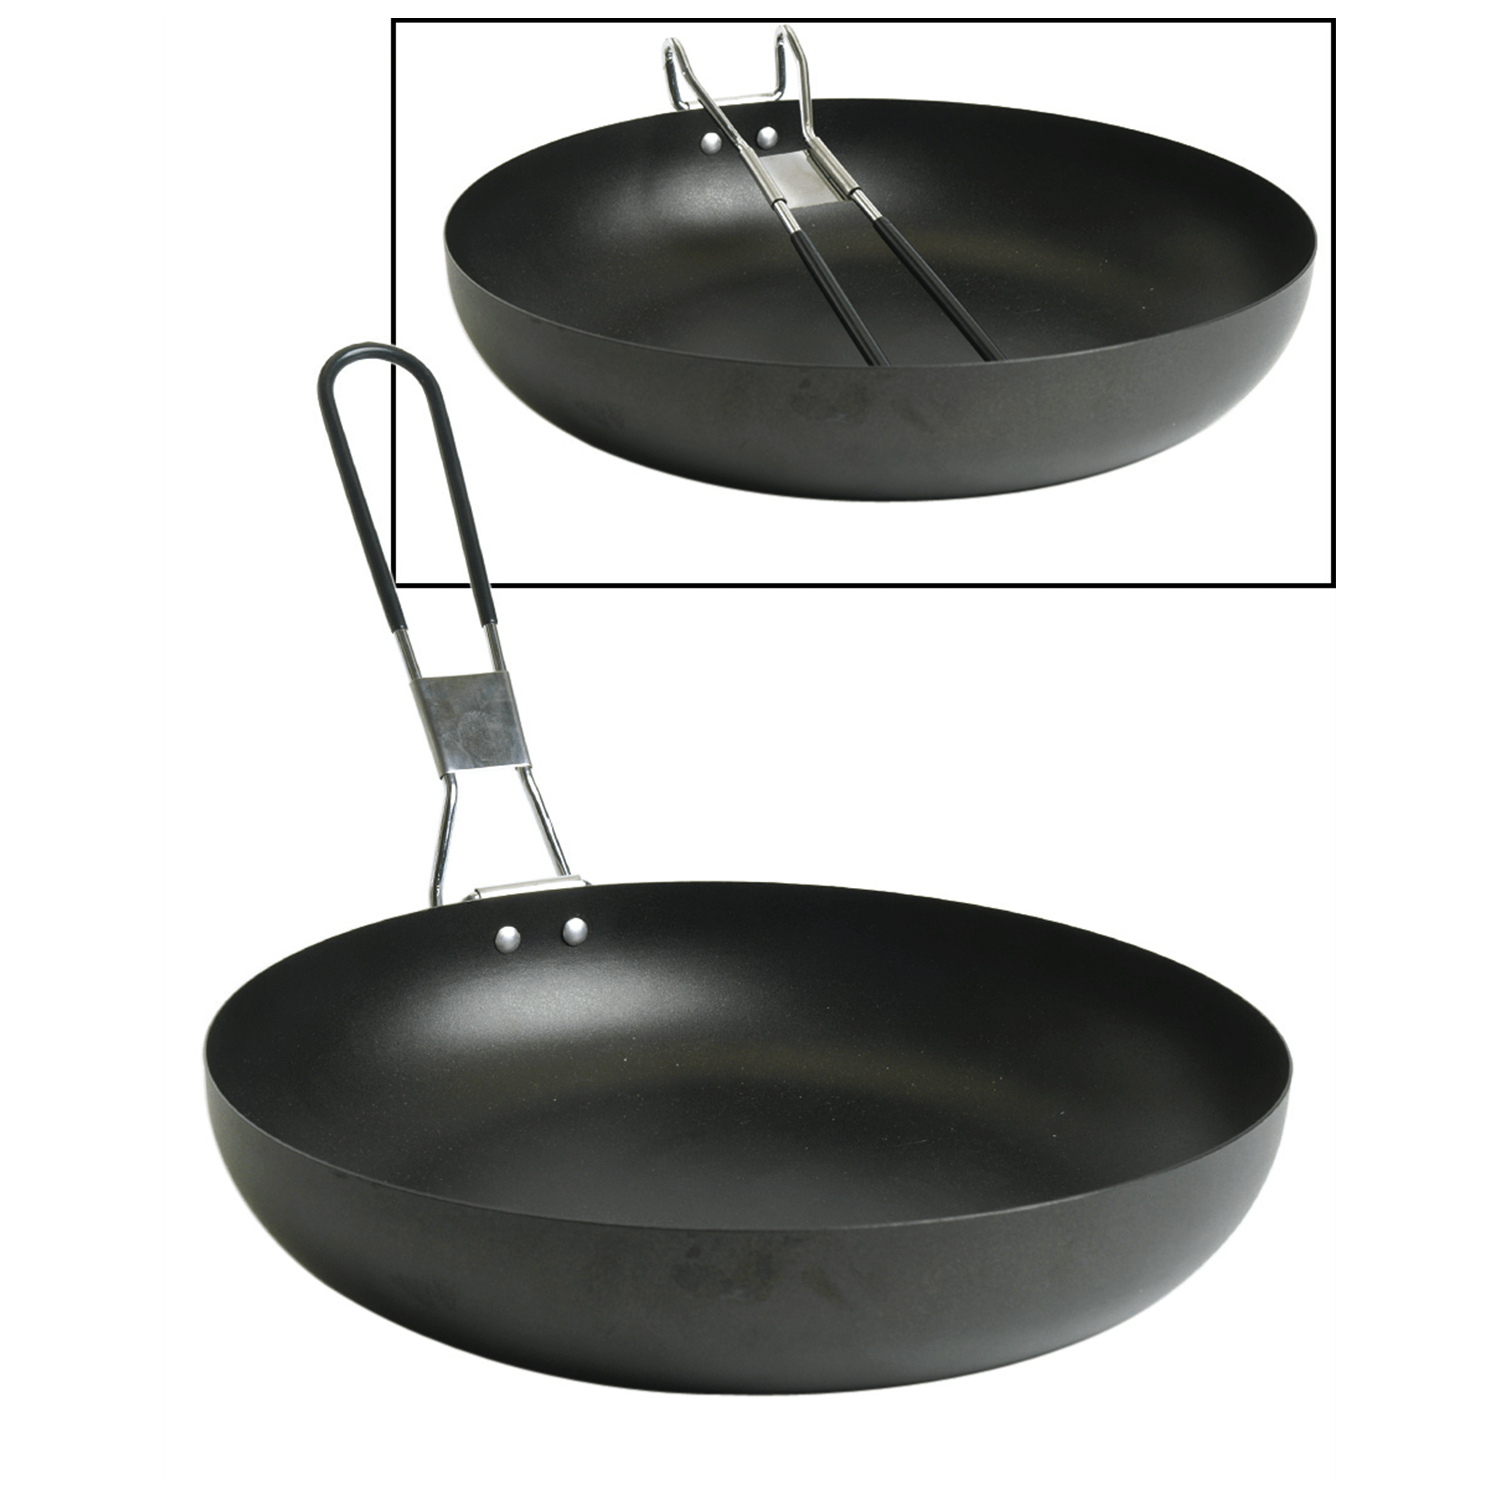 Mil-Tec pan with foldable stock - Outdoor Kitchen